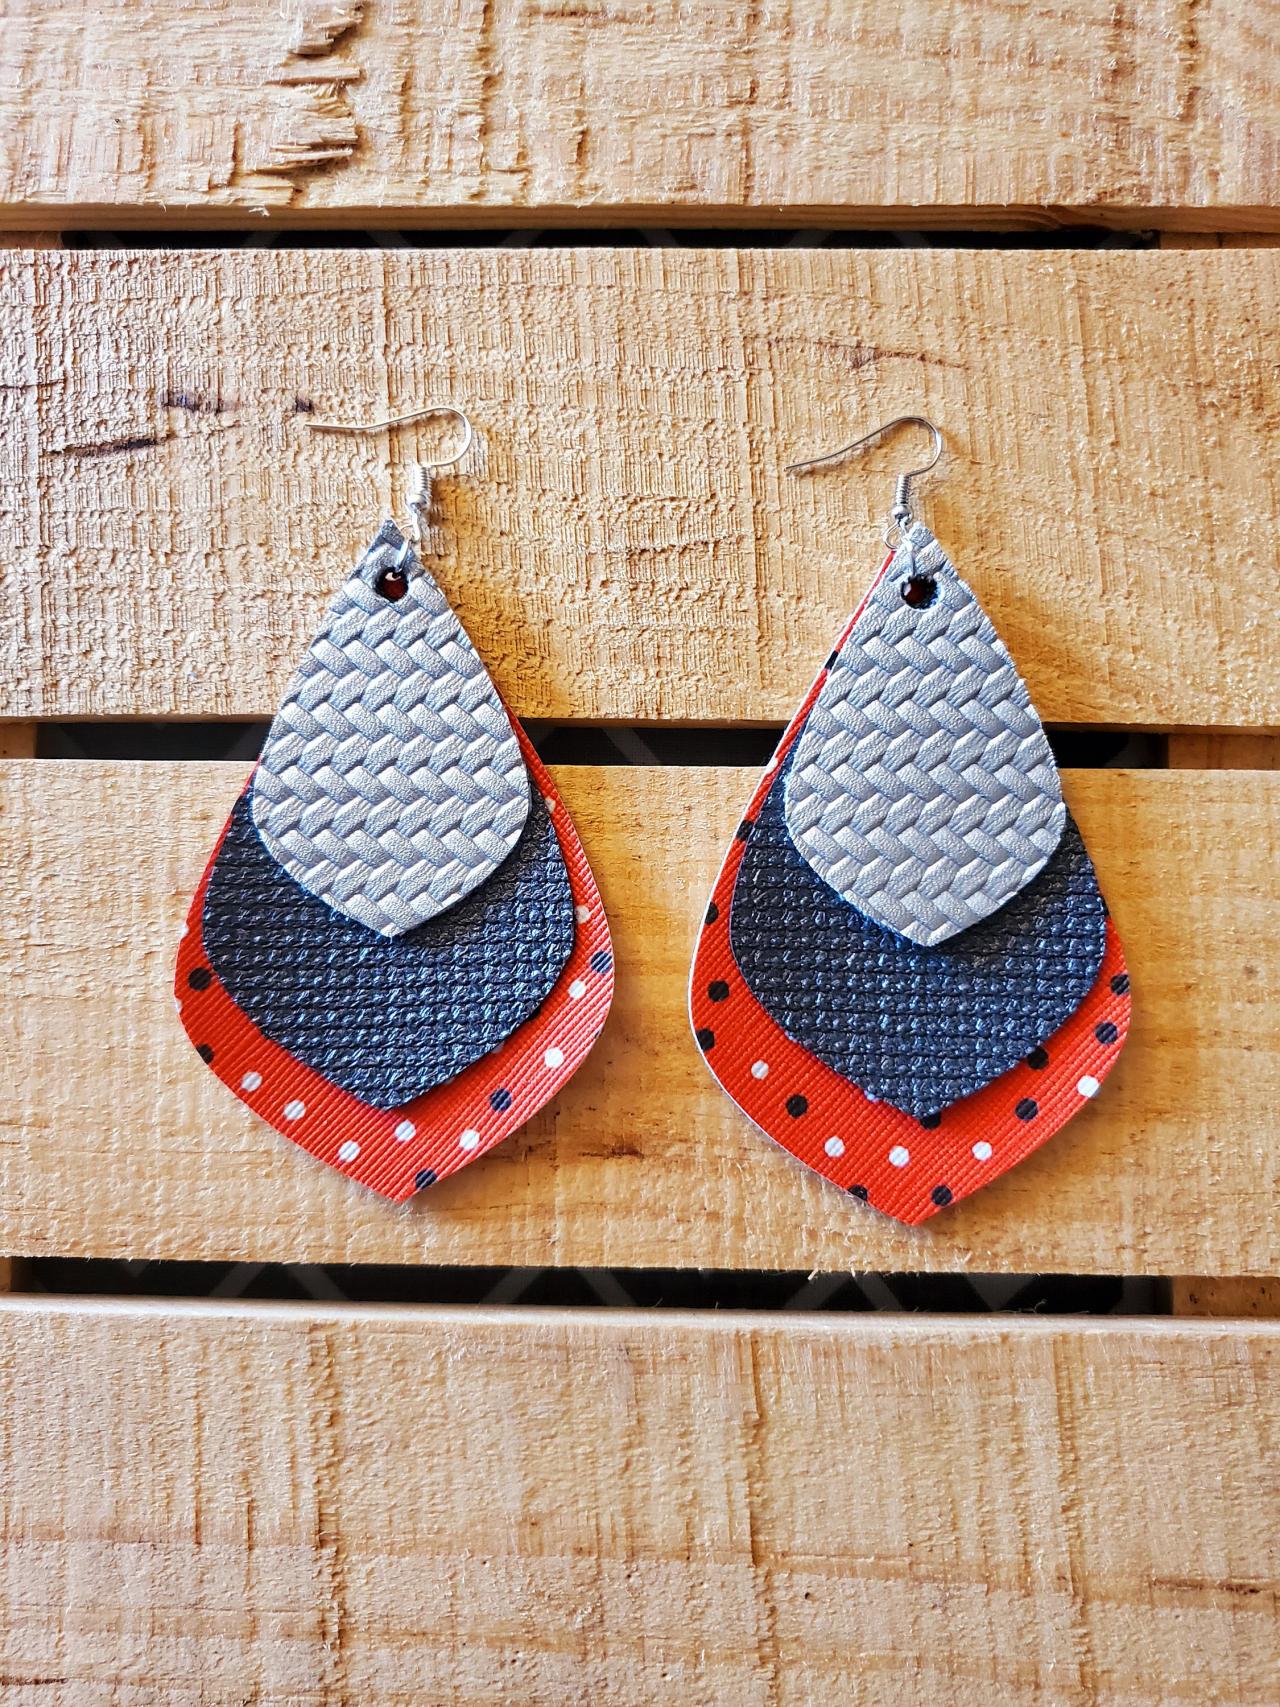 Triple Layered Leather Earrings, Red Black And Silver Earrings, Polka Dot Leather Earrings, Long Earrings, Statement Earrings, Womans Gift